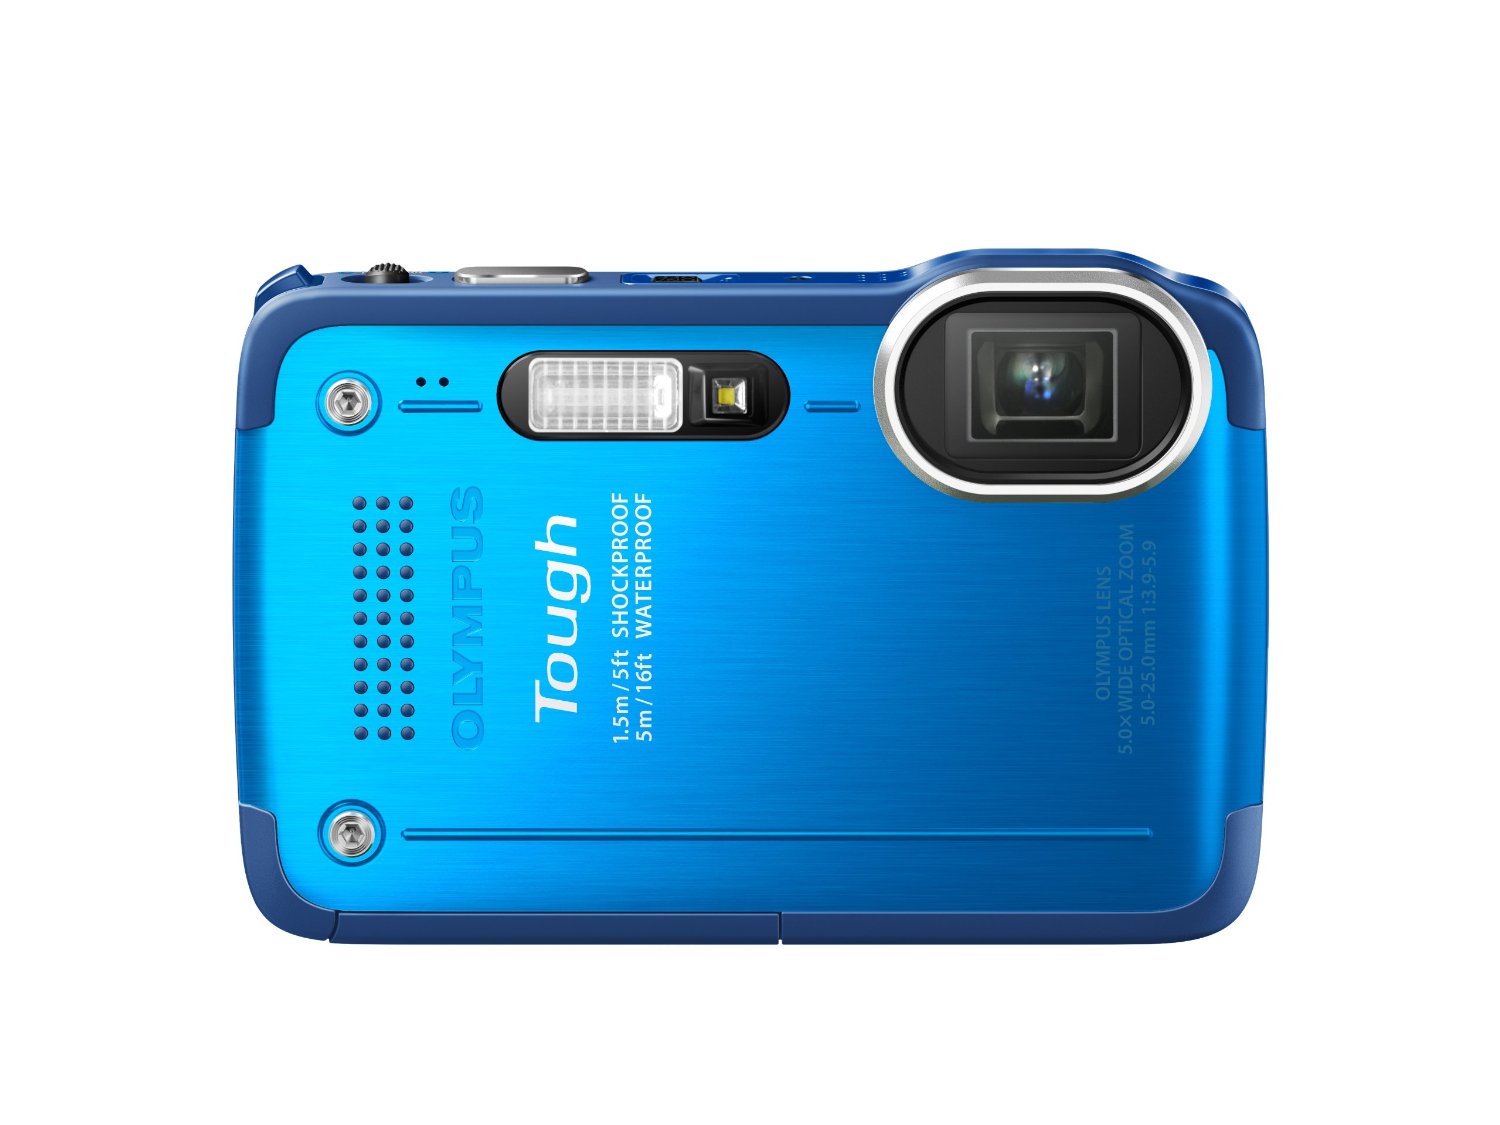 Olympus Stylus TG-630 iHS Digital Camera with 5x Optical Zoom and 3-Inch LCD